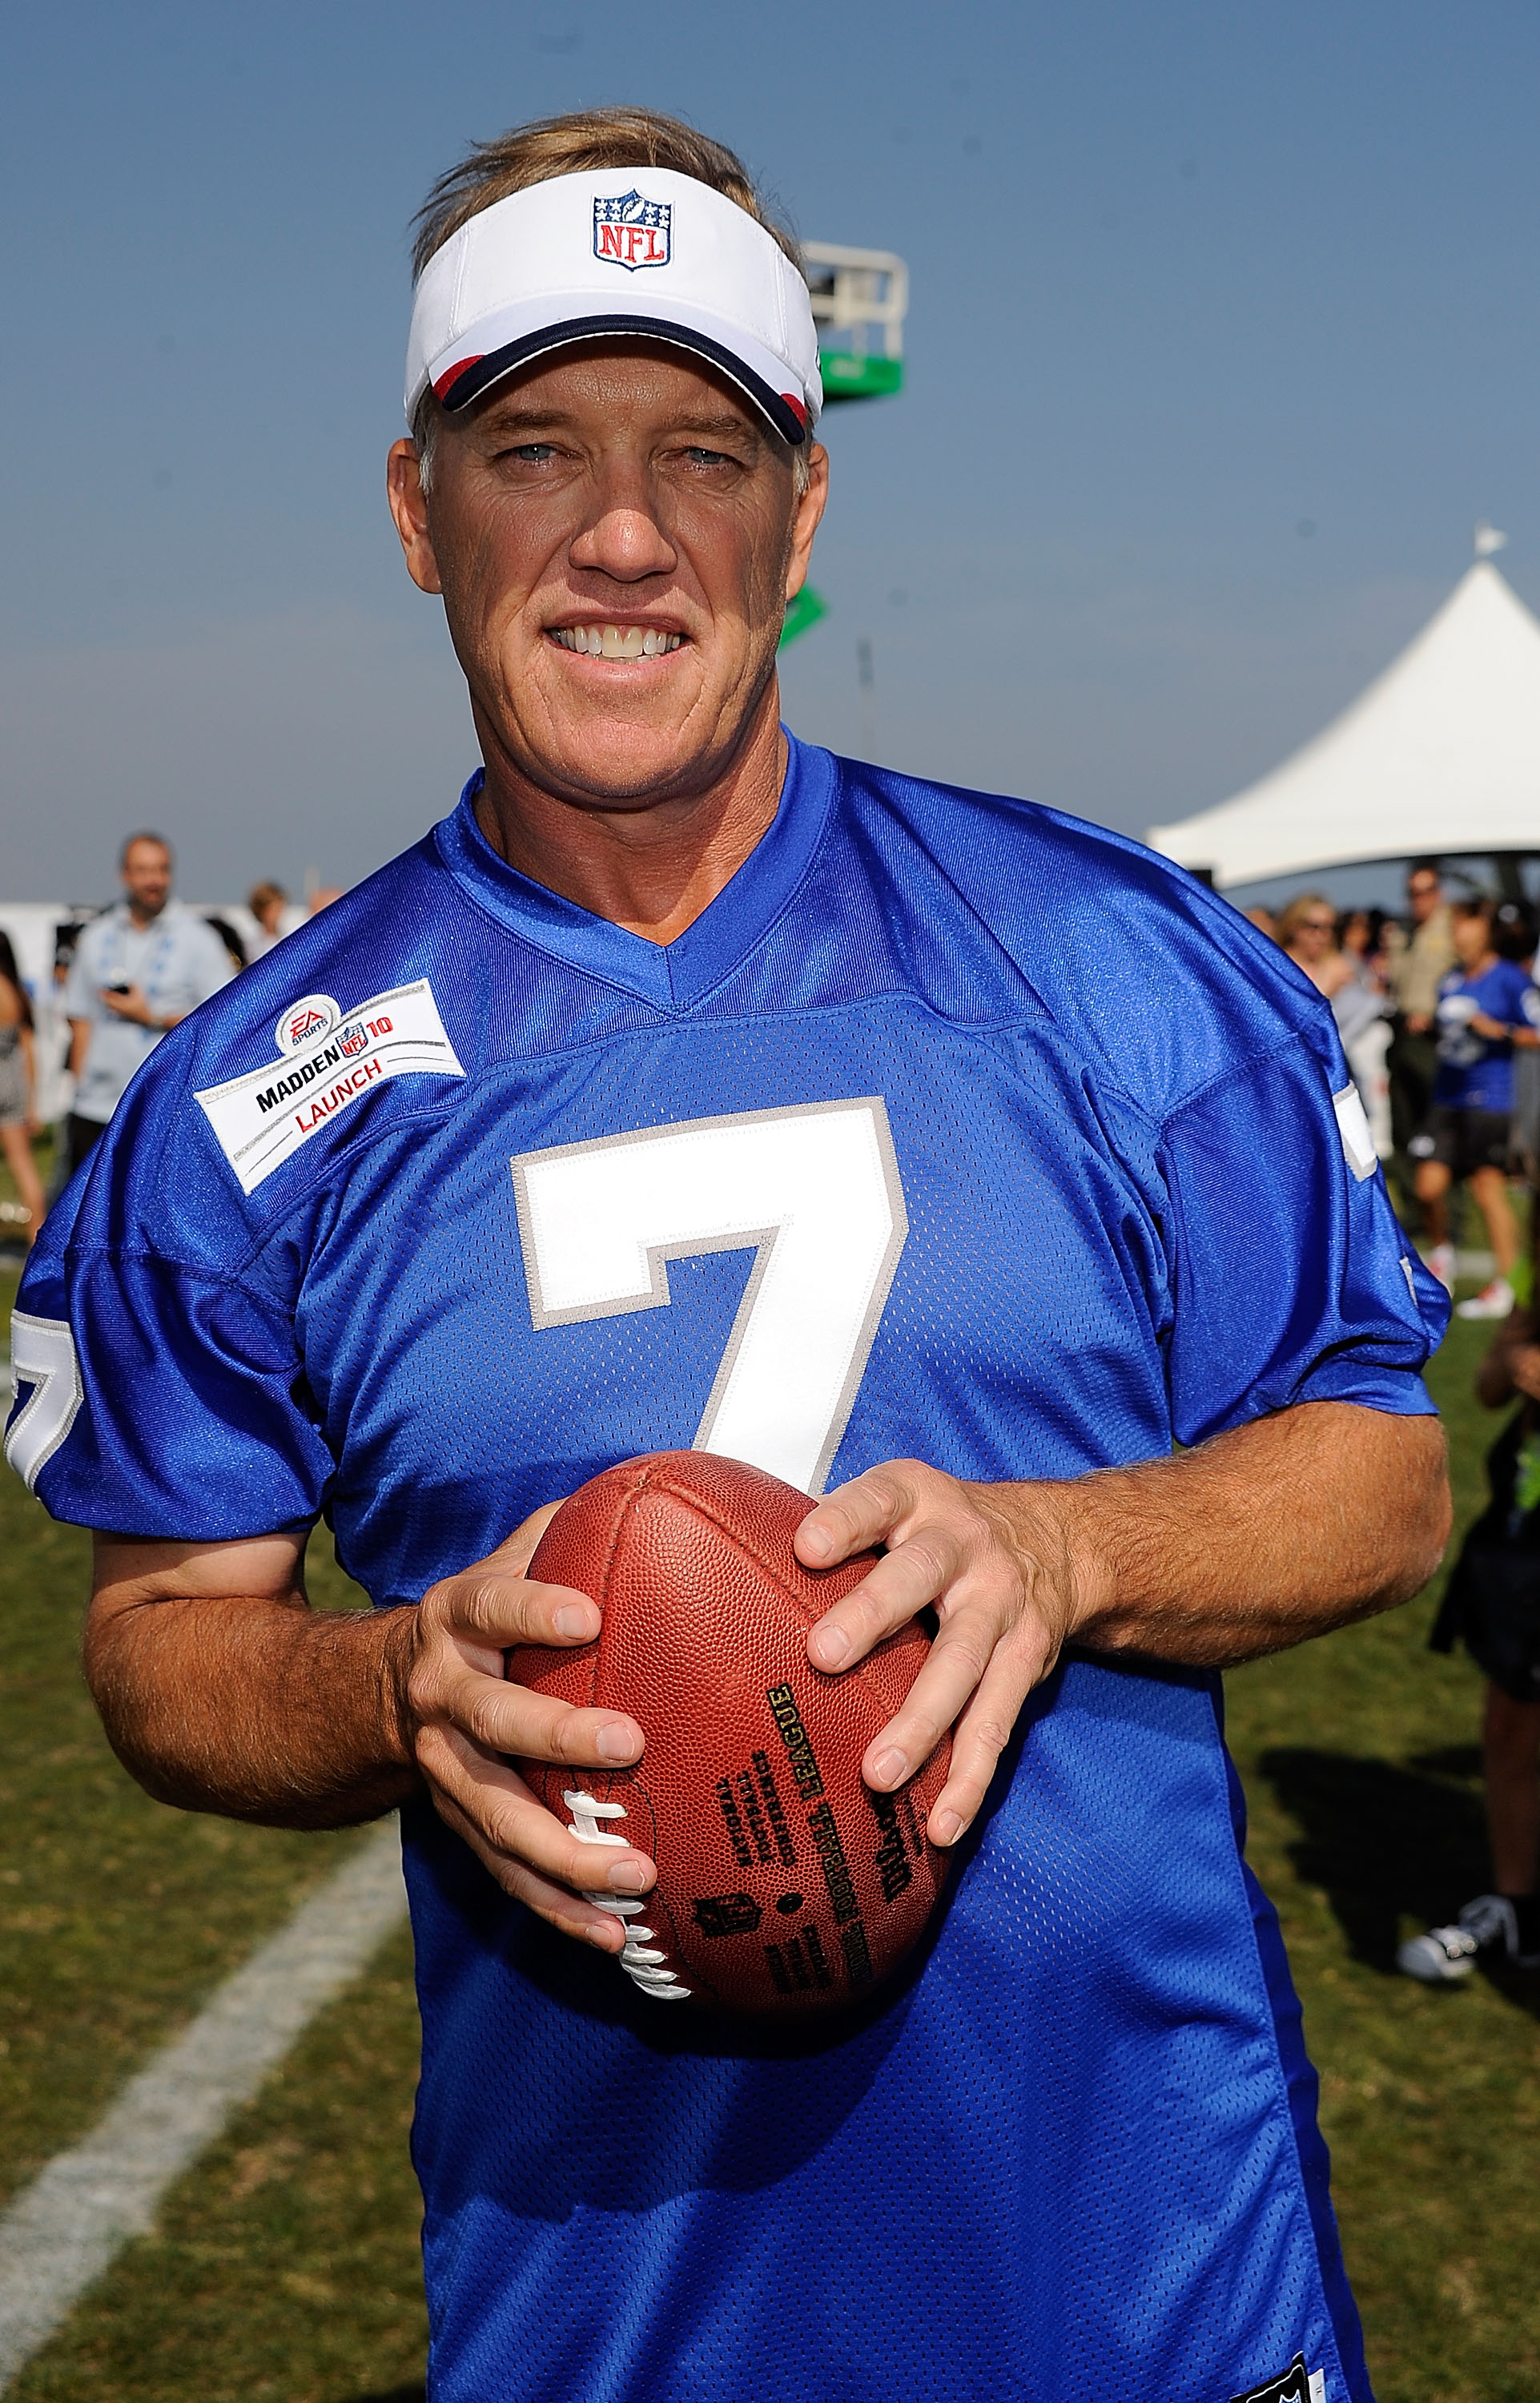 MALIBU, CA - JULY 24:Athlete John Elway takes part in the Madden NFL 10 Pigskiin Pro-Am on Xbox 360 event  on July 24, 2009 in Malibu, California.  (Photo by Frazer Harrison/Getty Images)